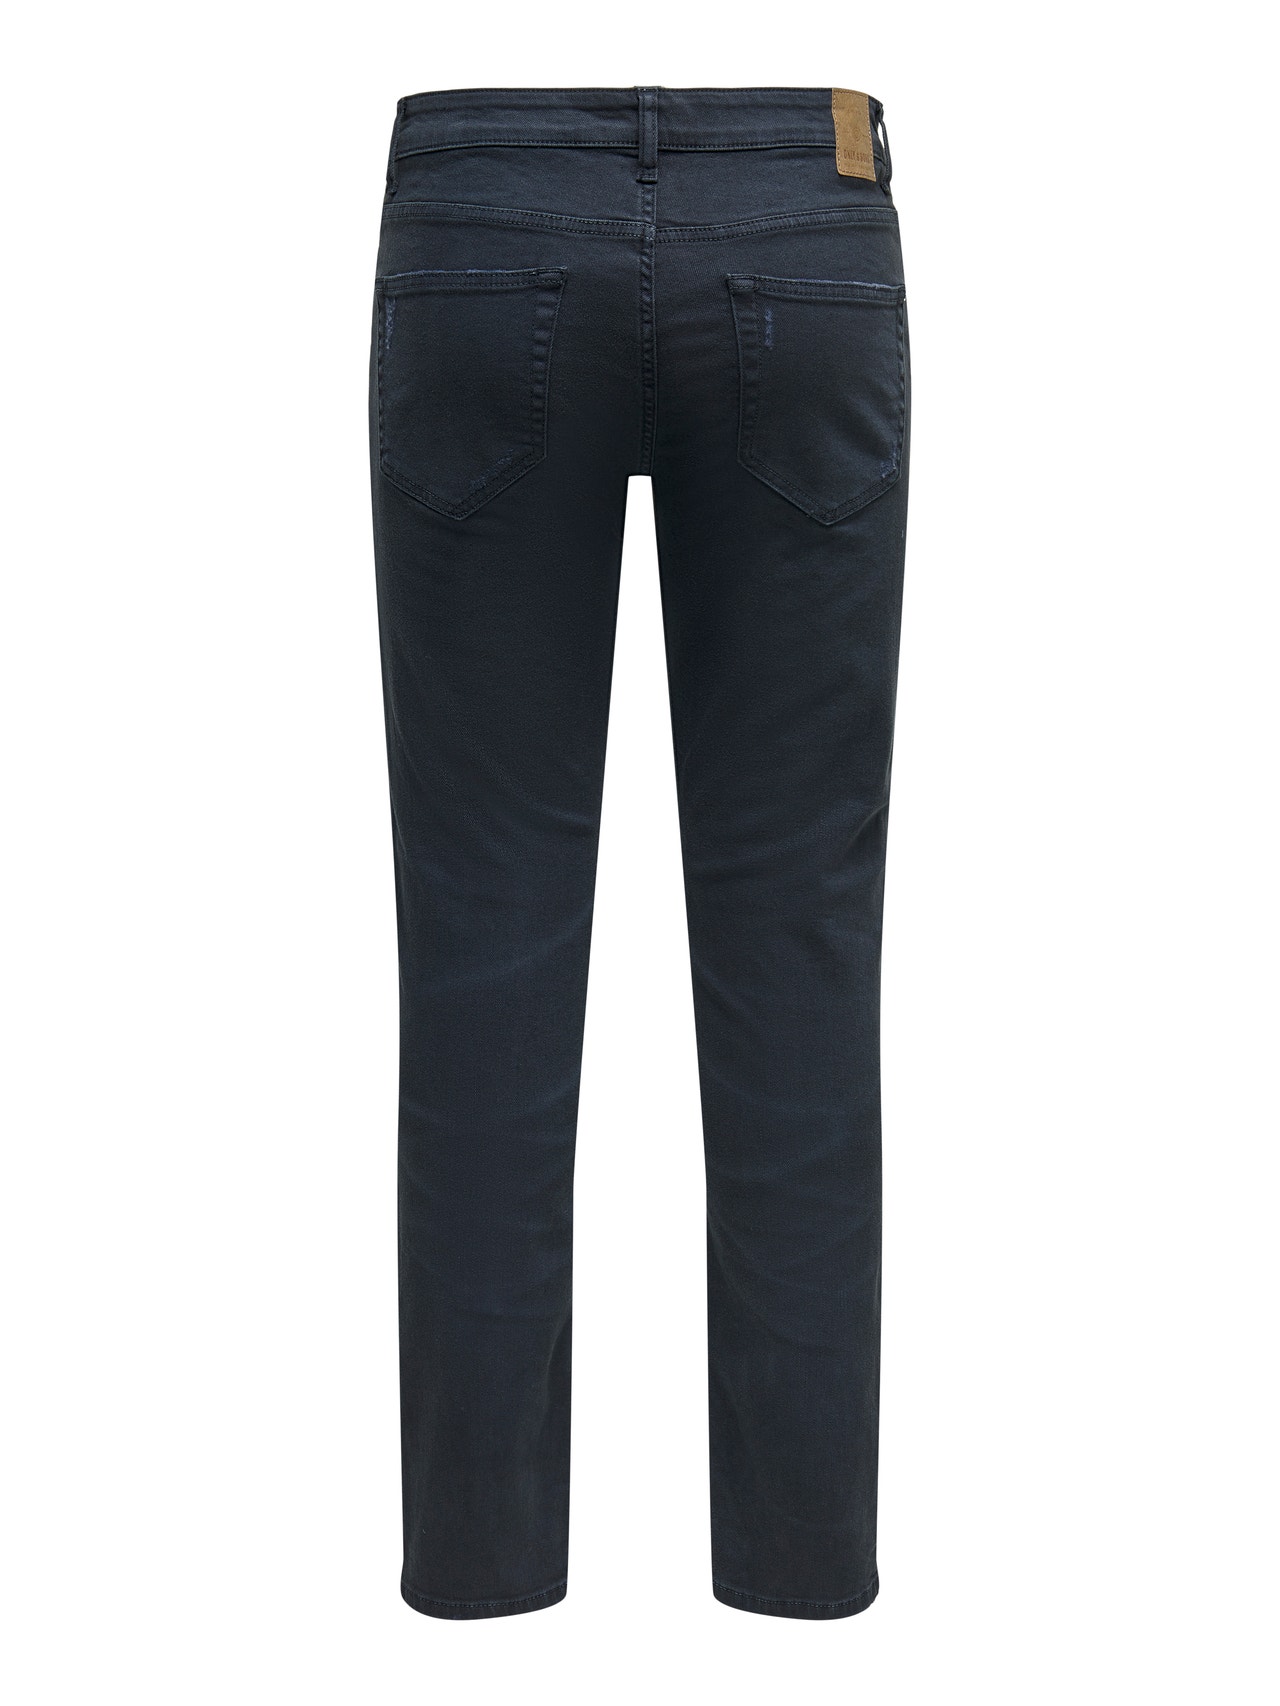 ONLY & SONS ONSLOOM LIFE SLIM WASHED MA 1849 -Dark Navy - 22021849